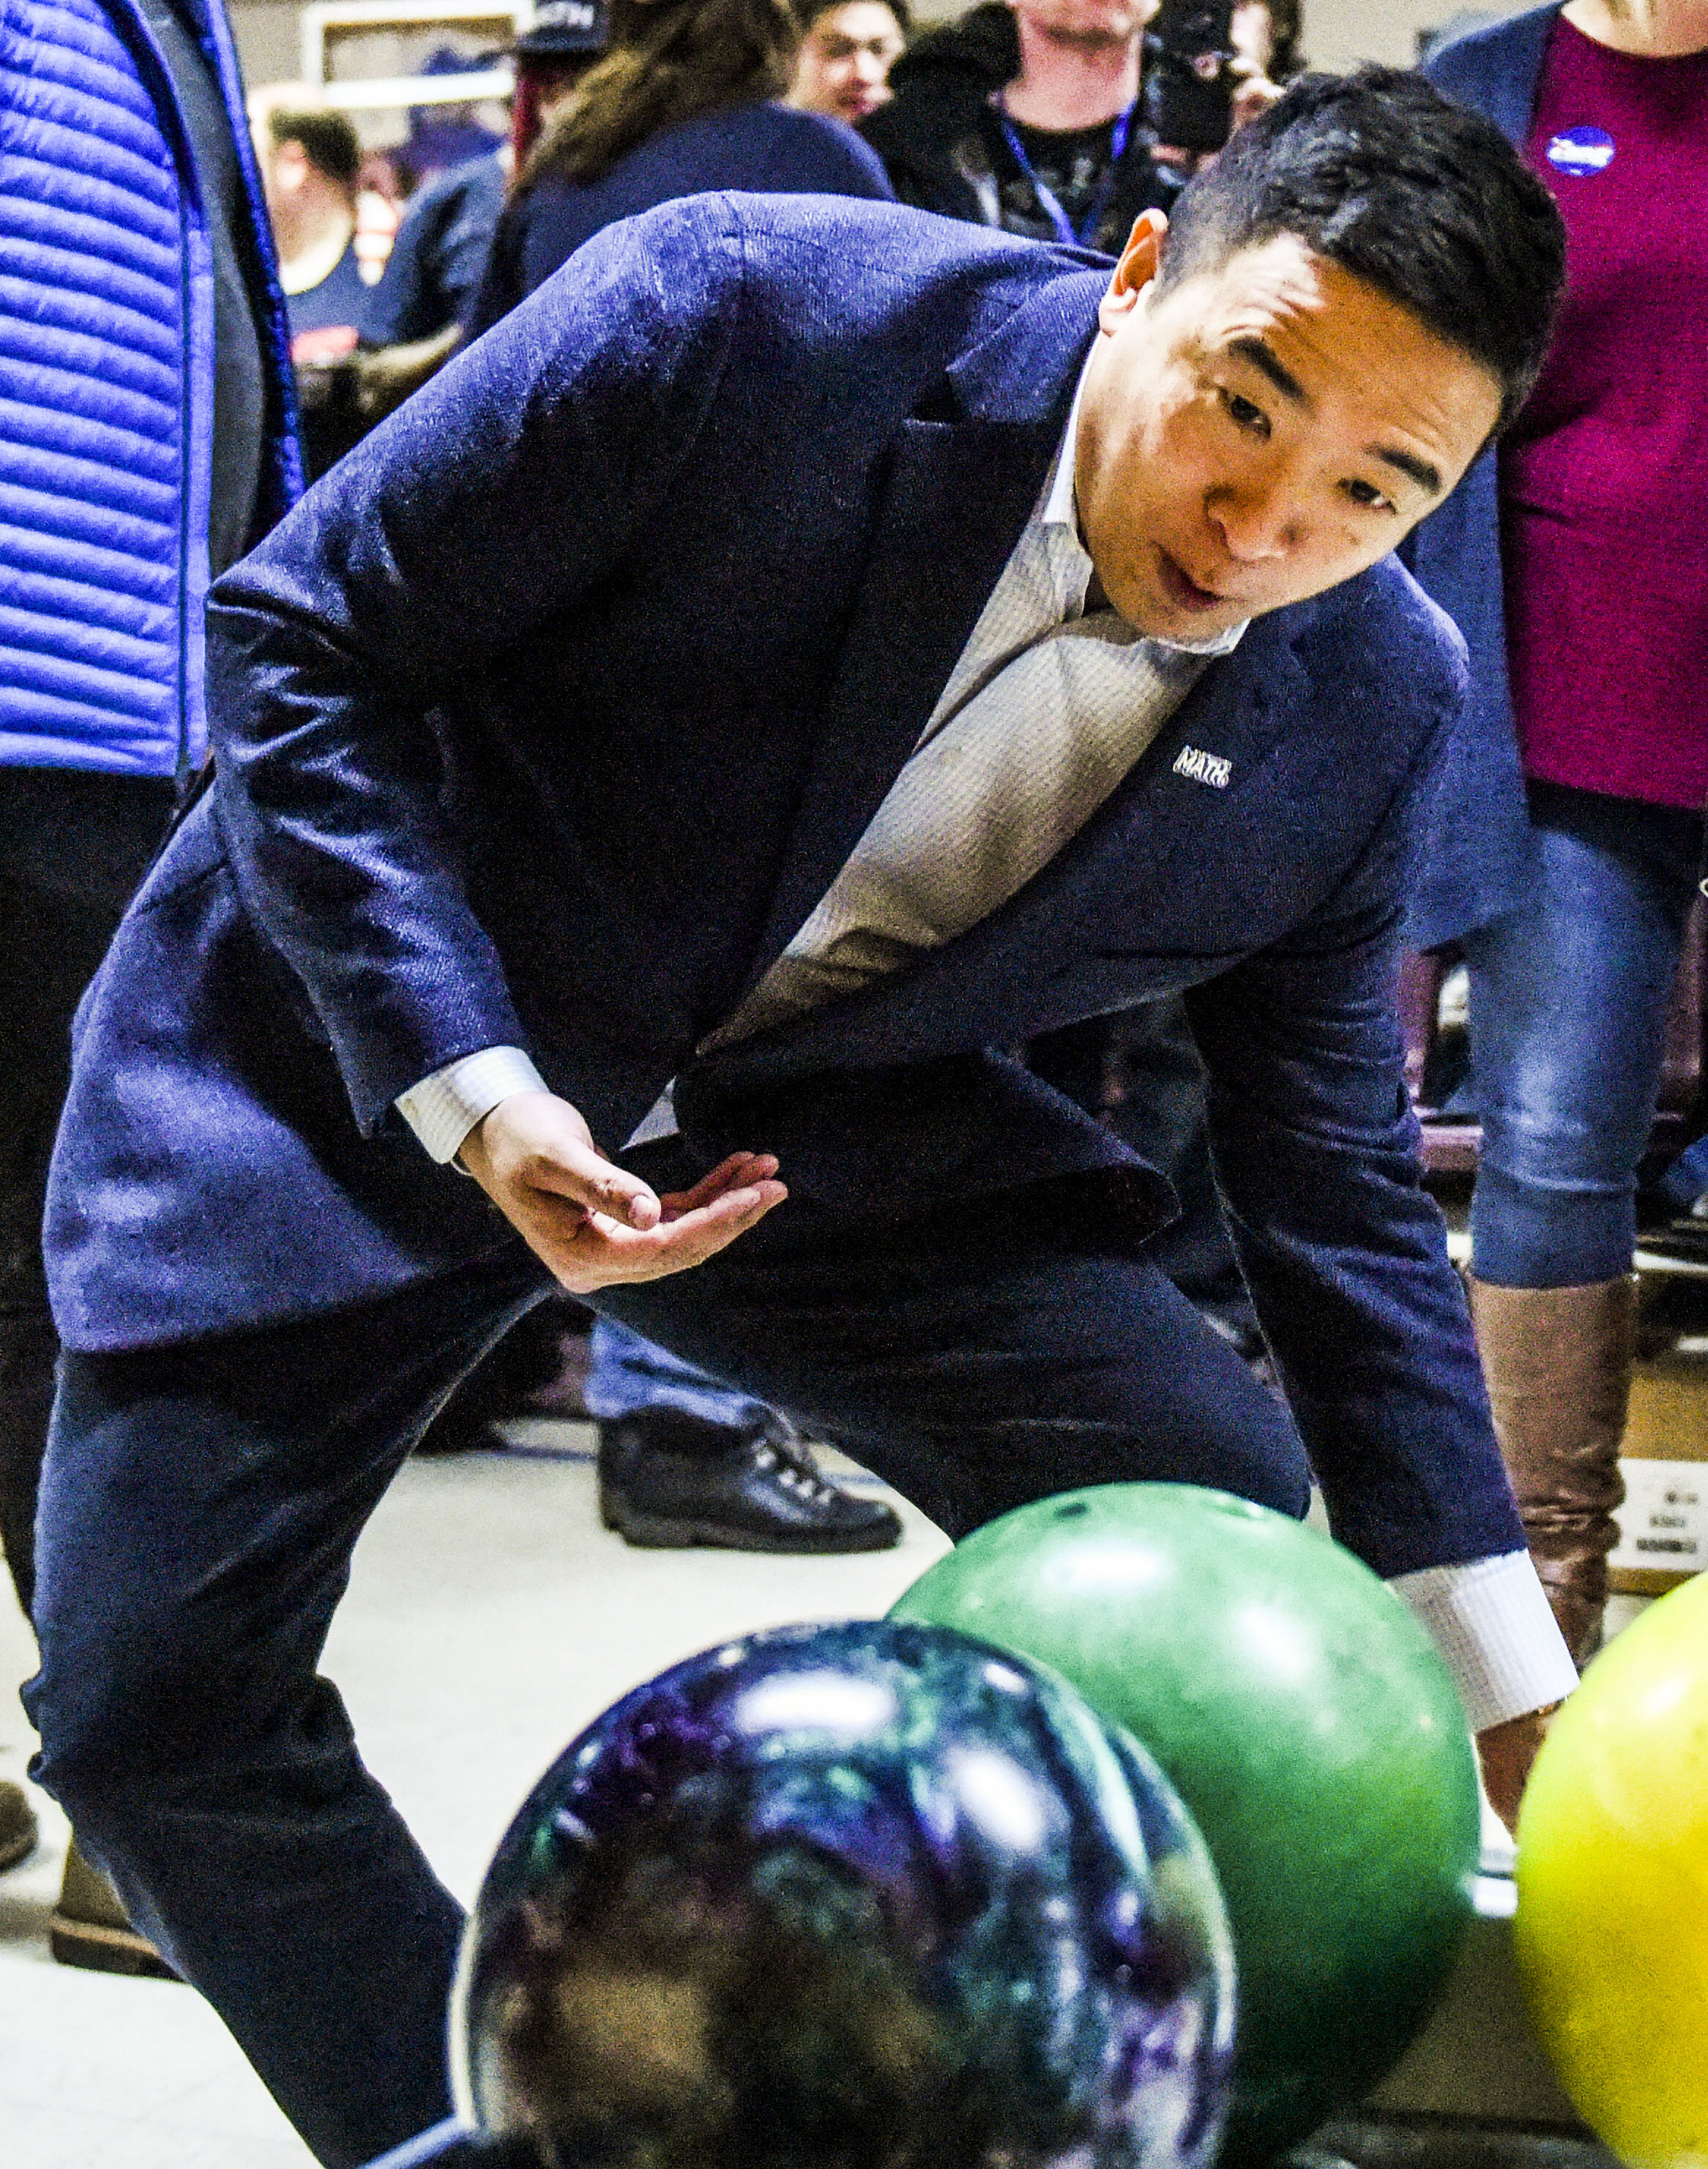  Democratic presidential hopeful and entrepreneur Andrew Yang made a stop at Big River Bowling to meet with supporters, Wednesday, Dec. 11, 2019, in Davenport. 